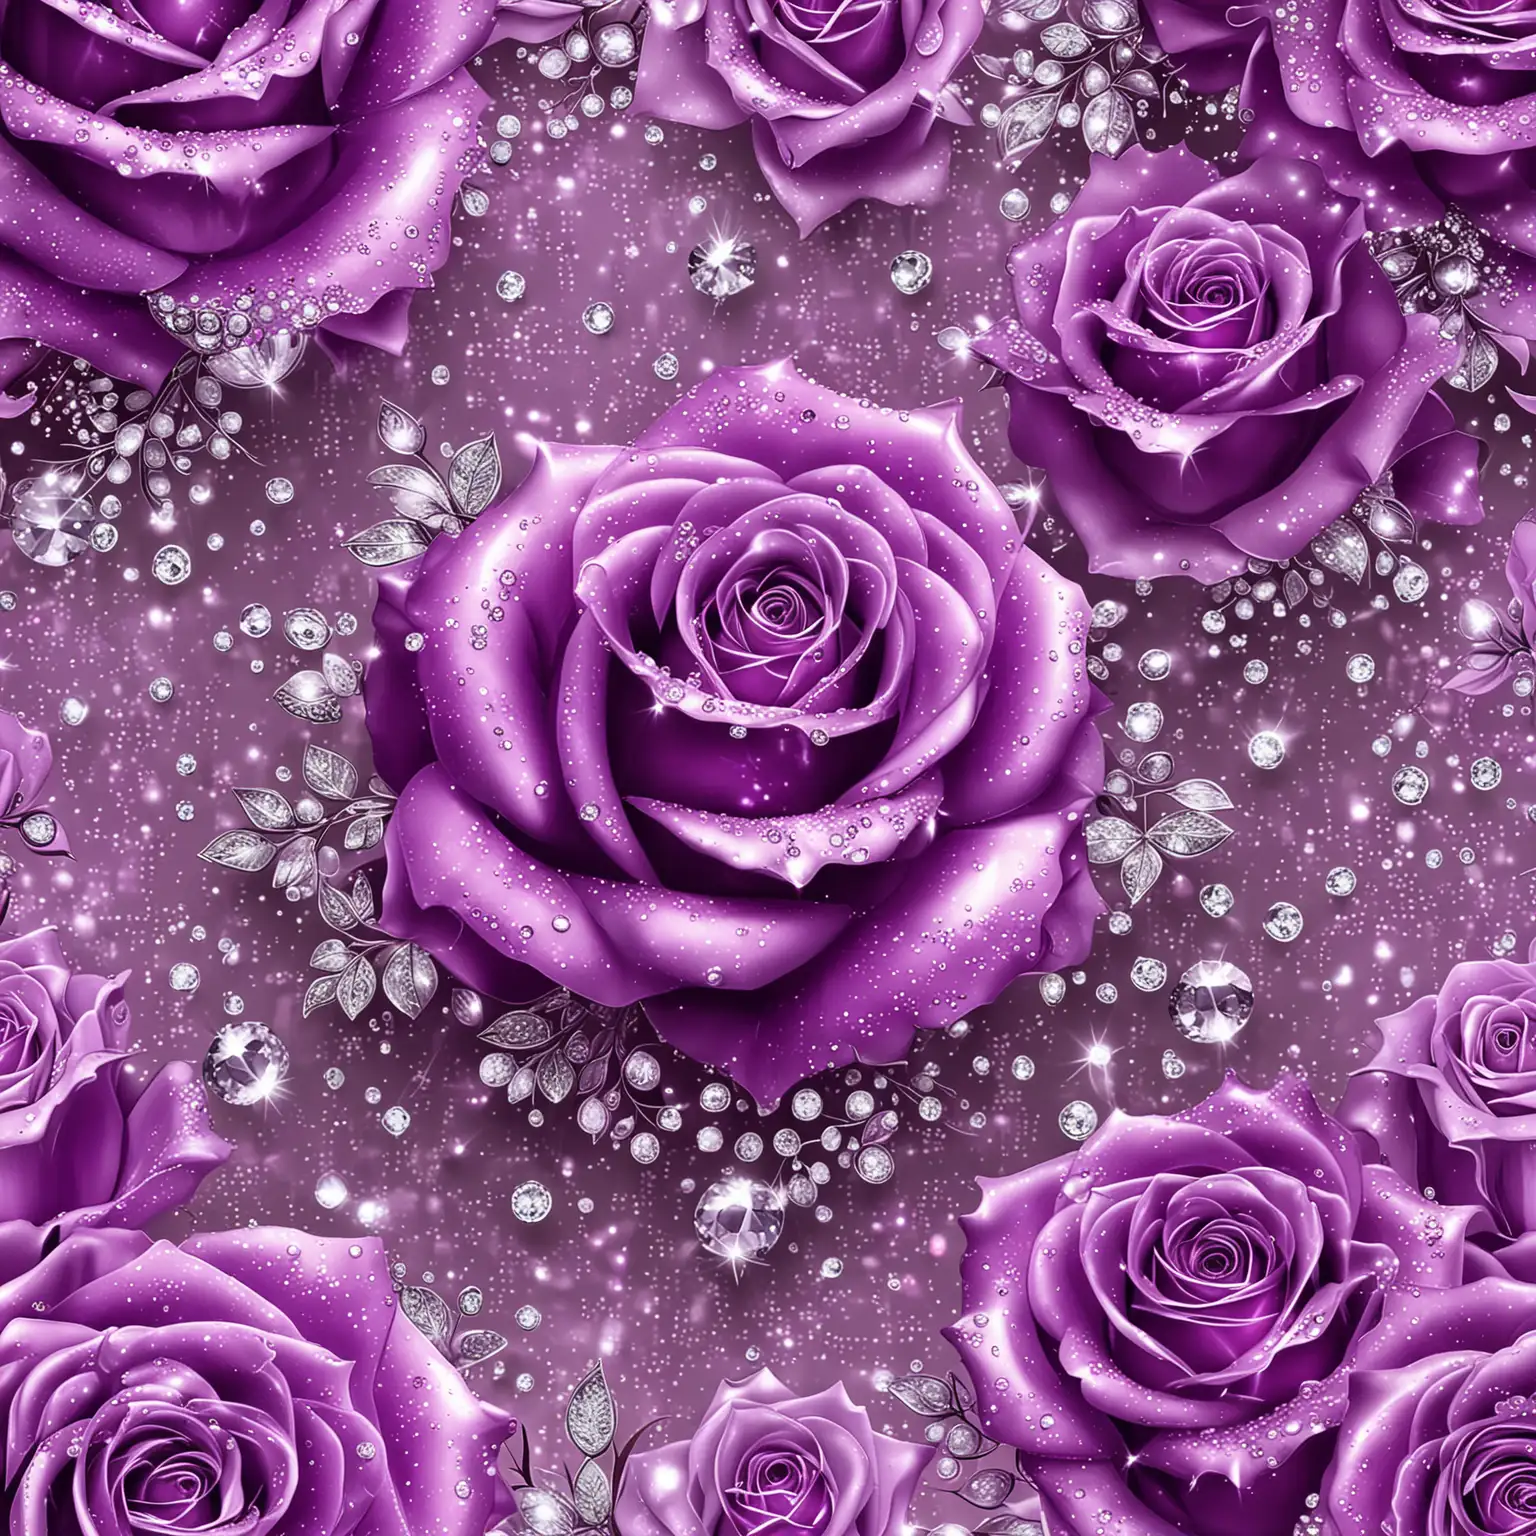 sparkly purple roses background with diamonds